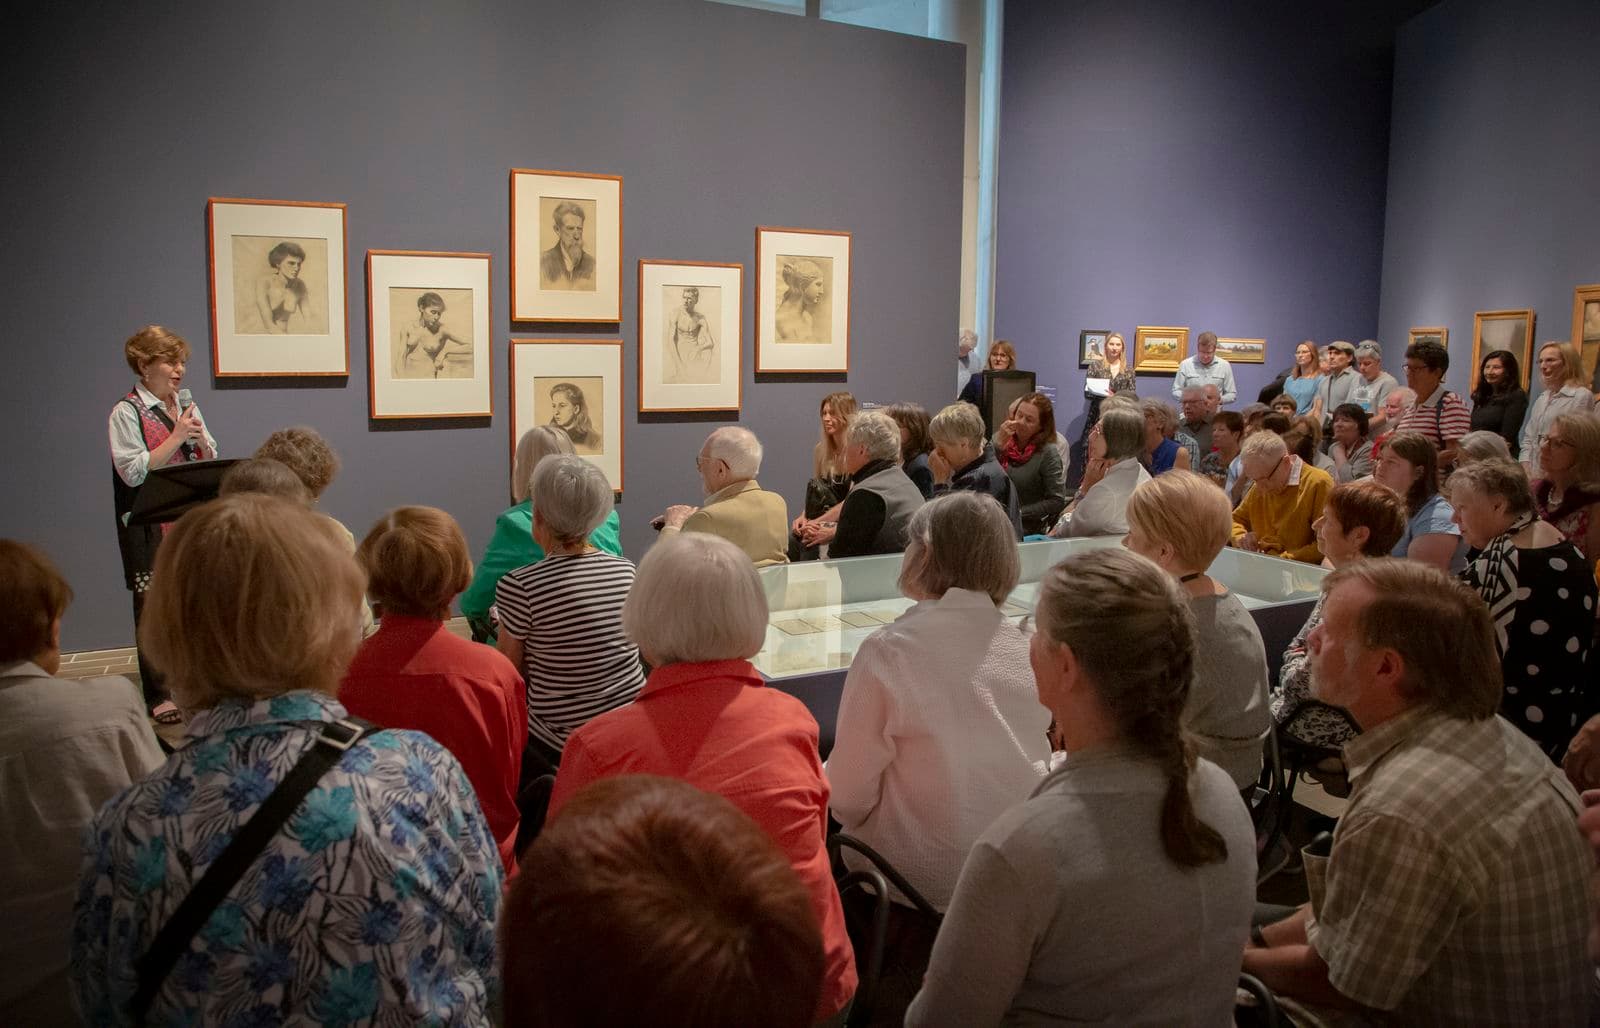 In a gallery space a woman is standing at a lectern speaking to a room of seated people.